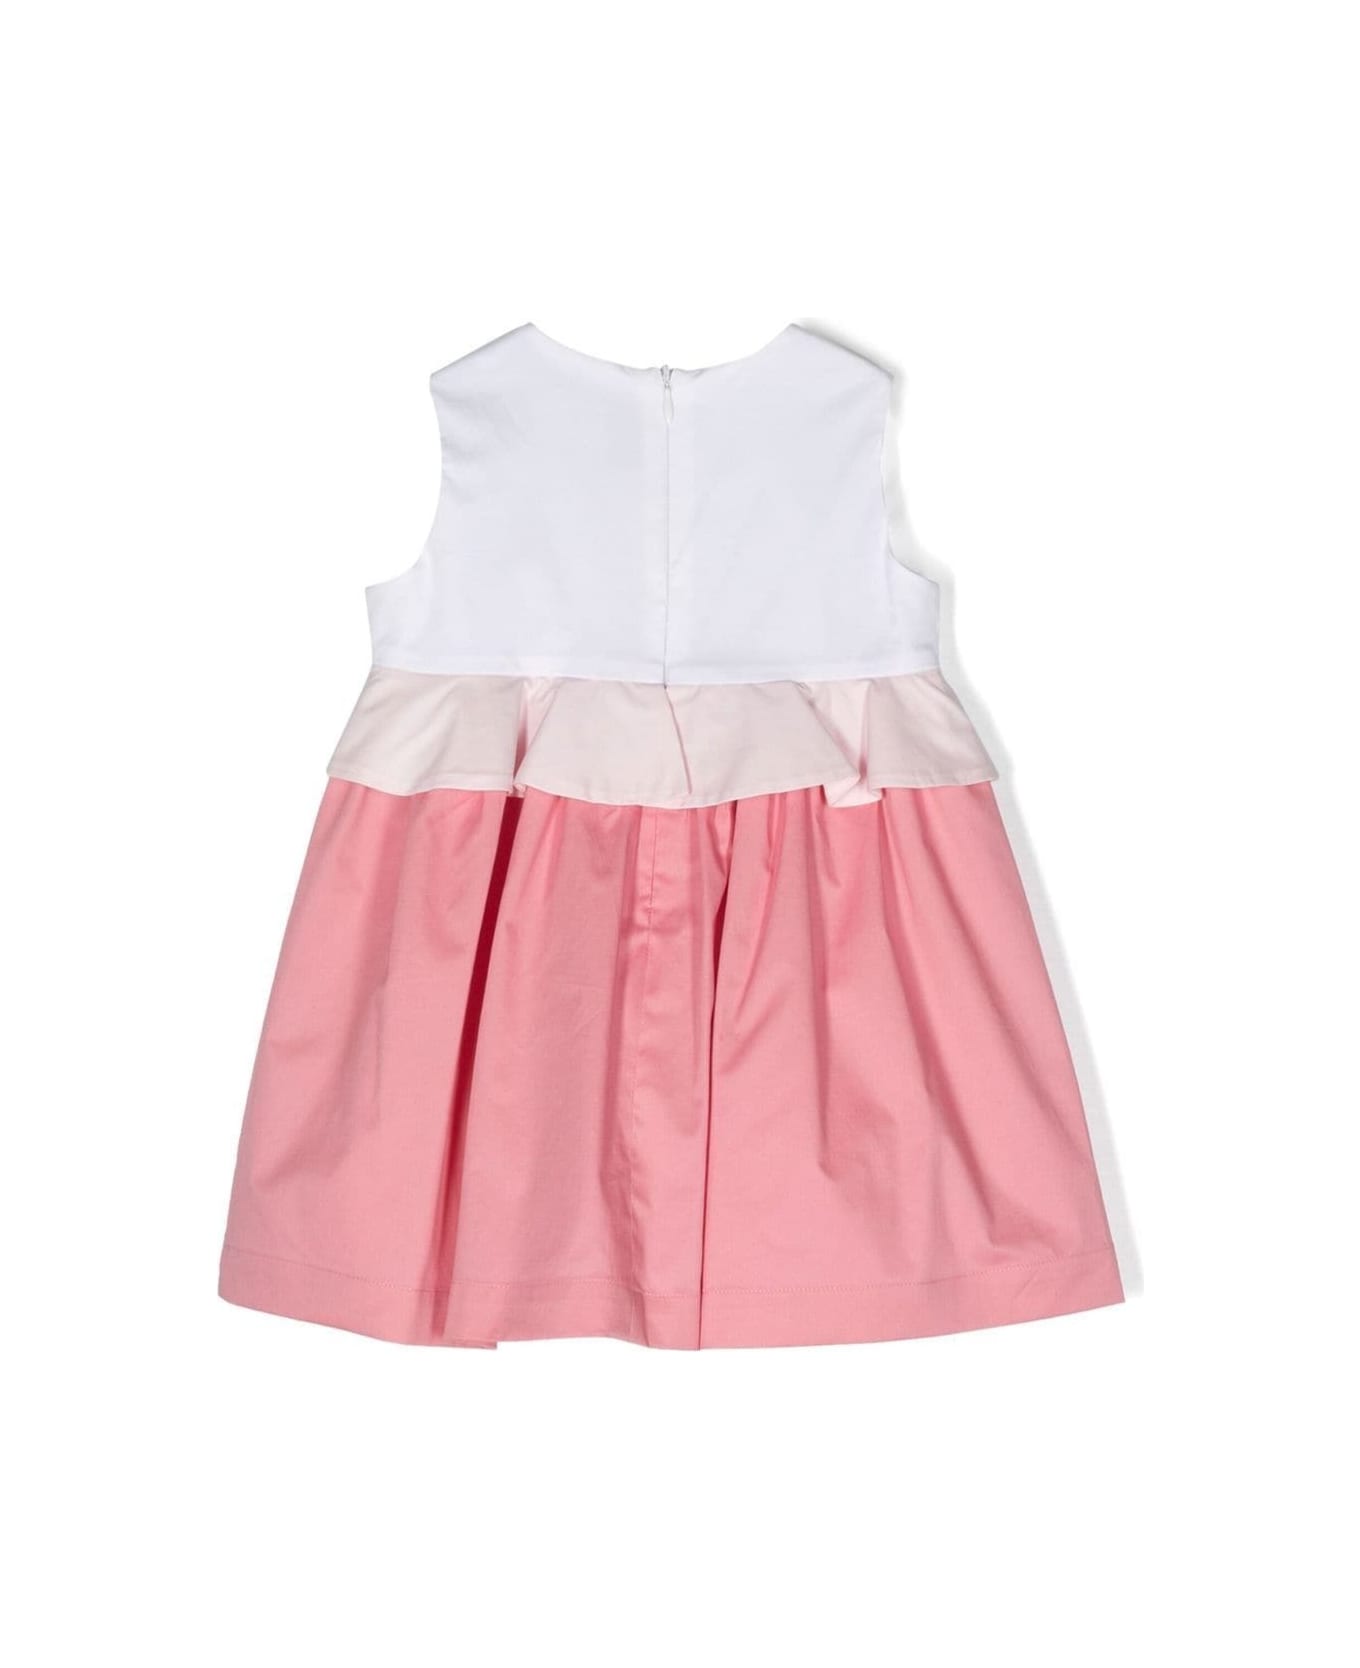 Il Gufo White And Pink Sleeveless Dress With Ruffle Detailing In Cotton Stretch Girl - Multicolor